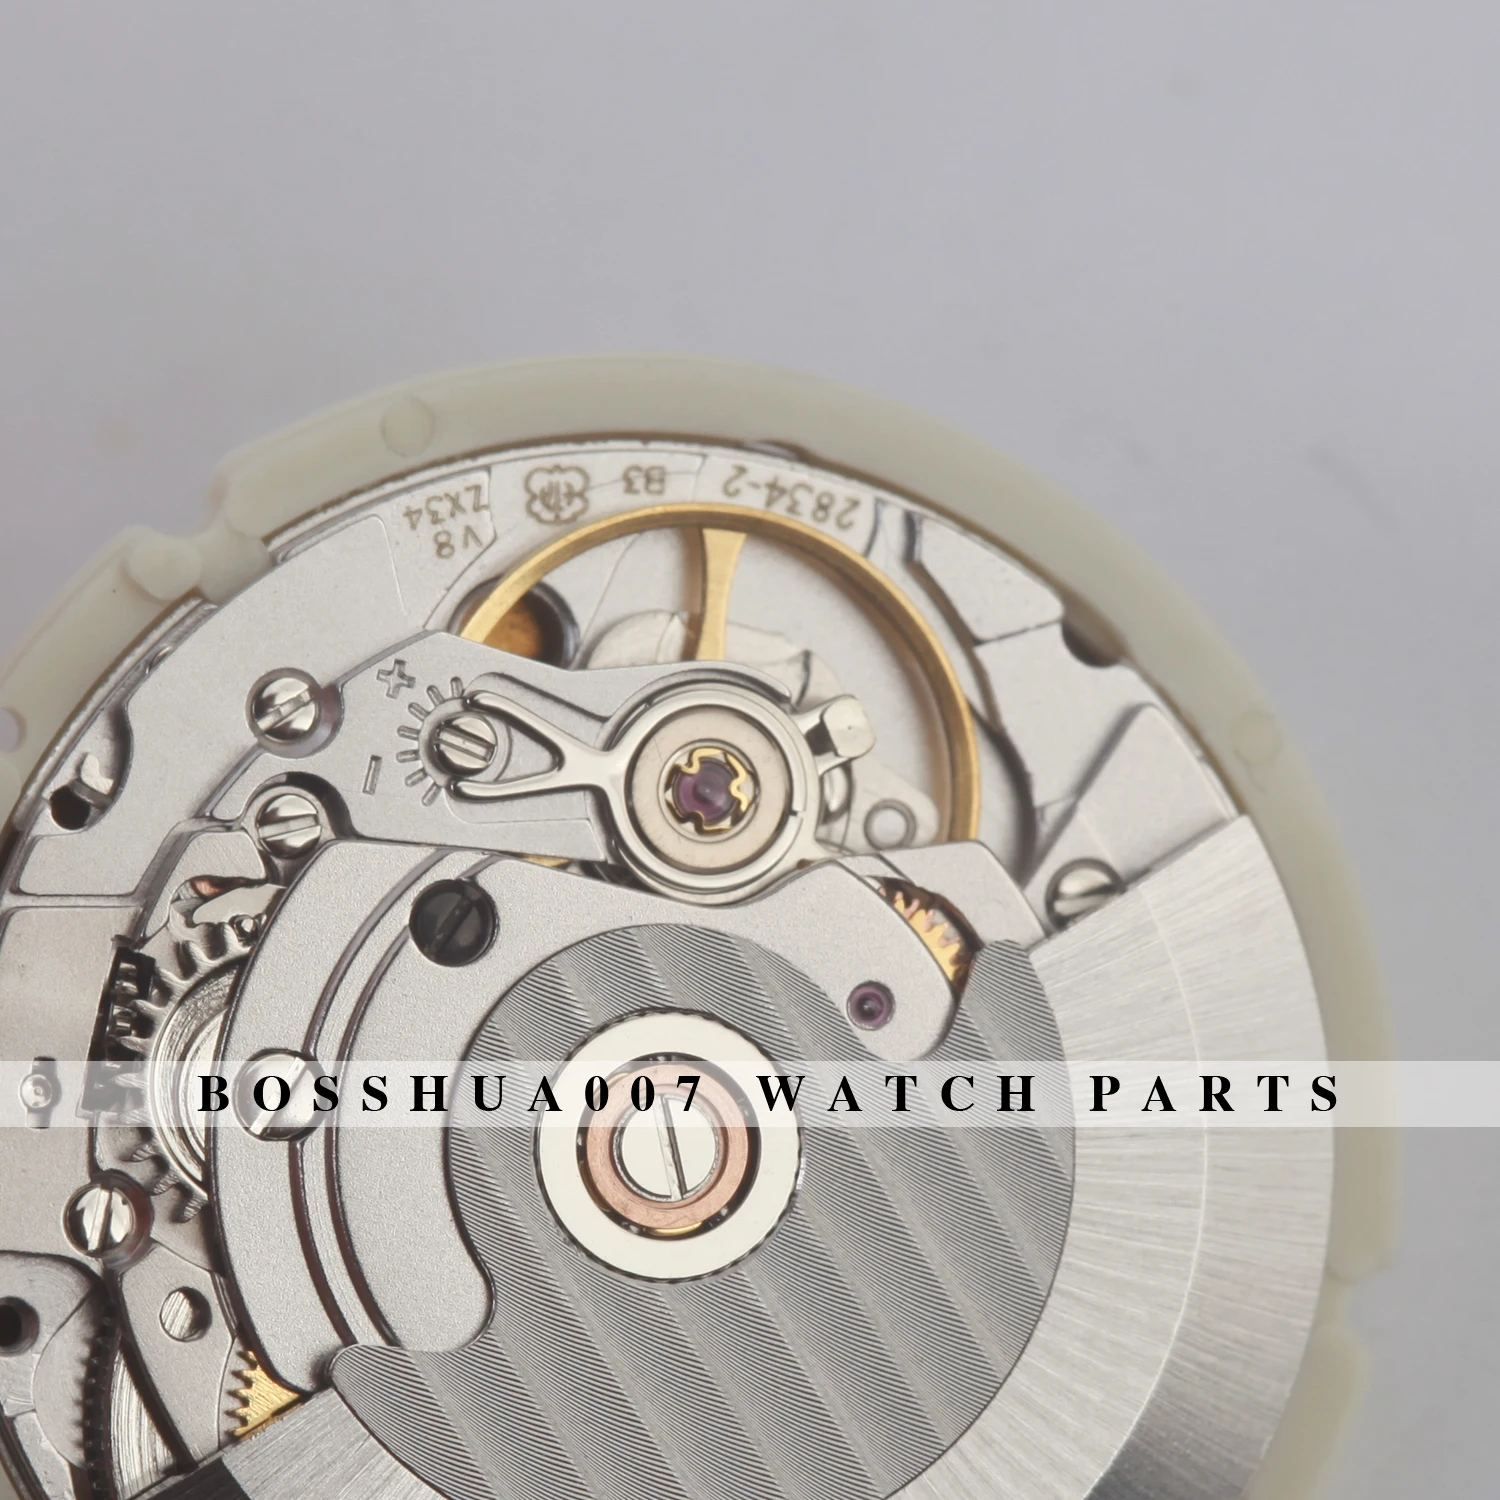 seagull made ST2100 Movement replace eta 2834 movement day date function enlarge